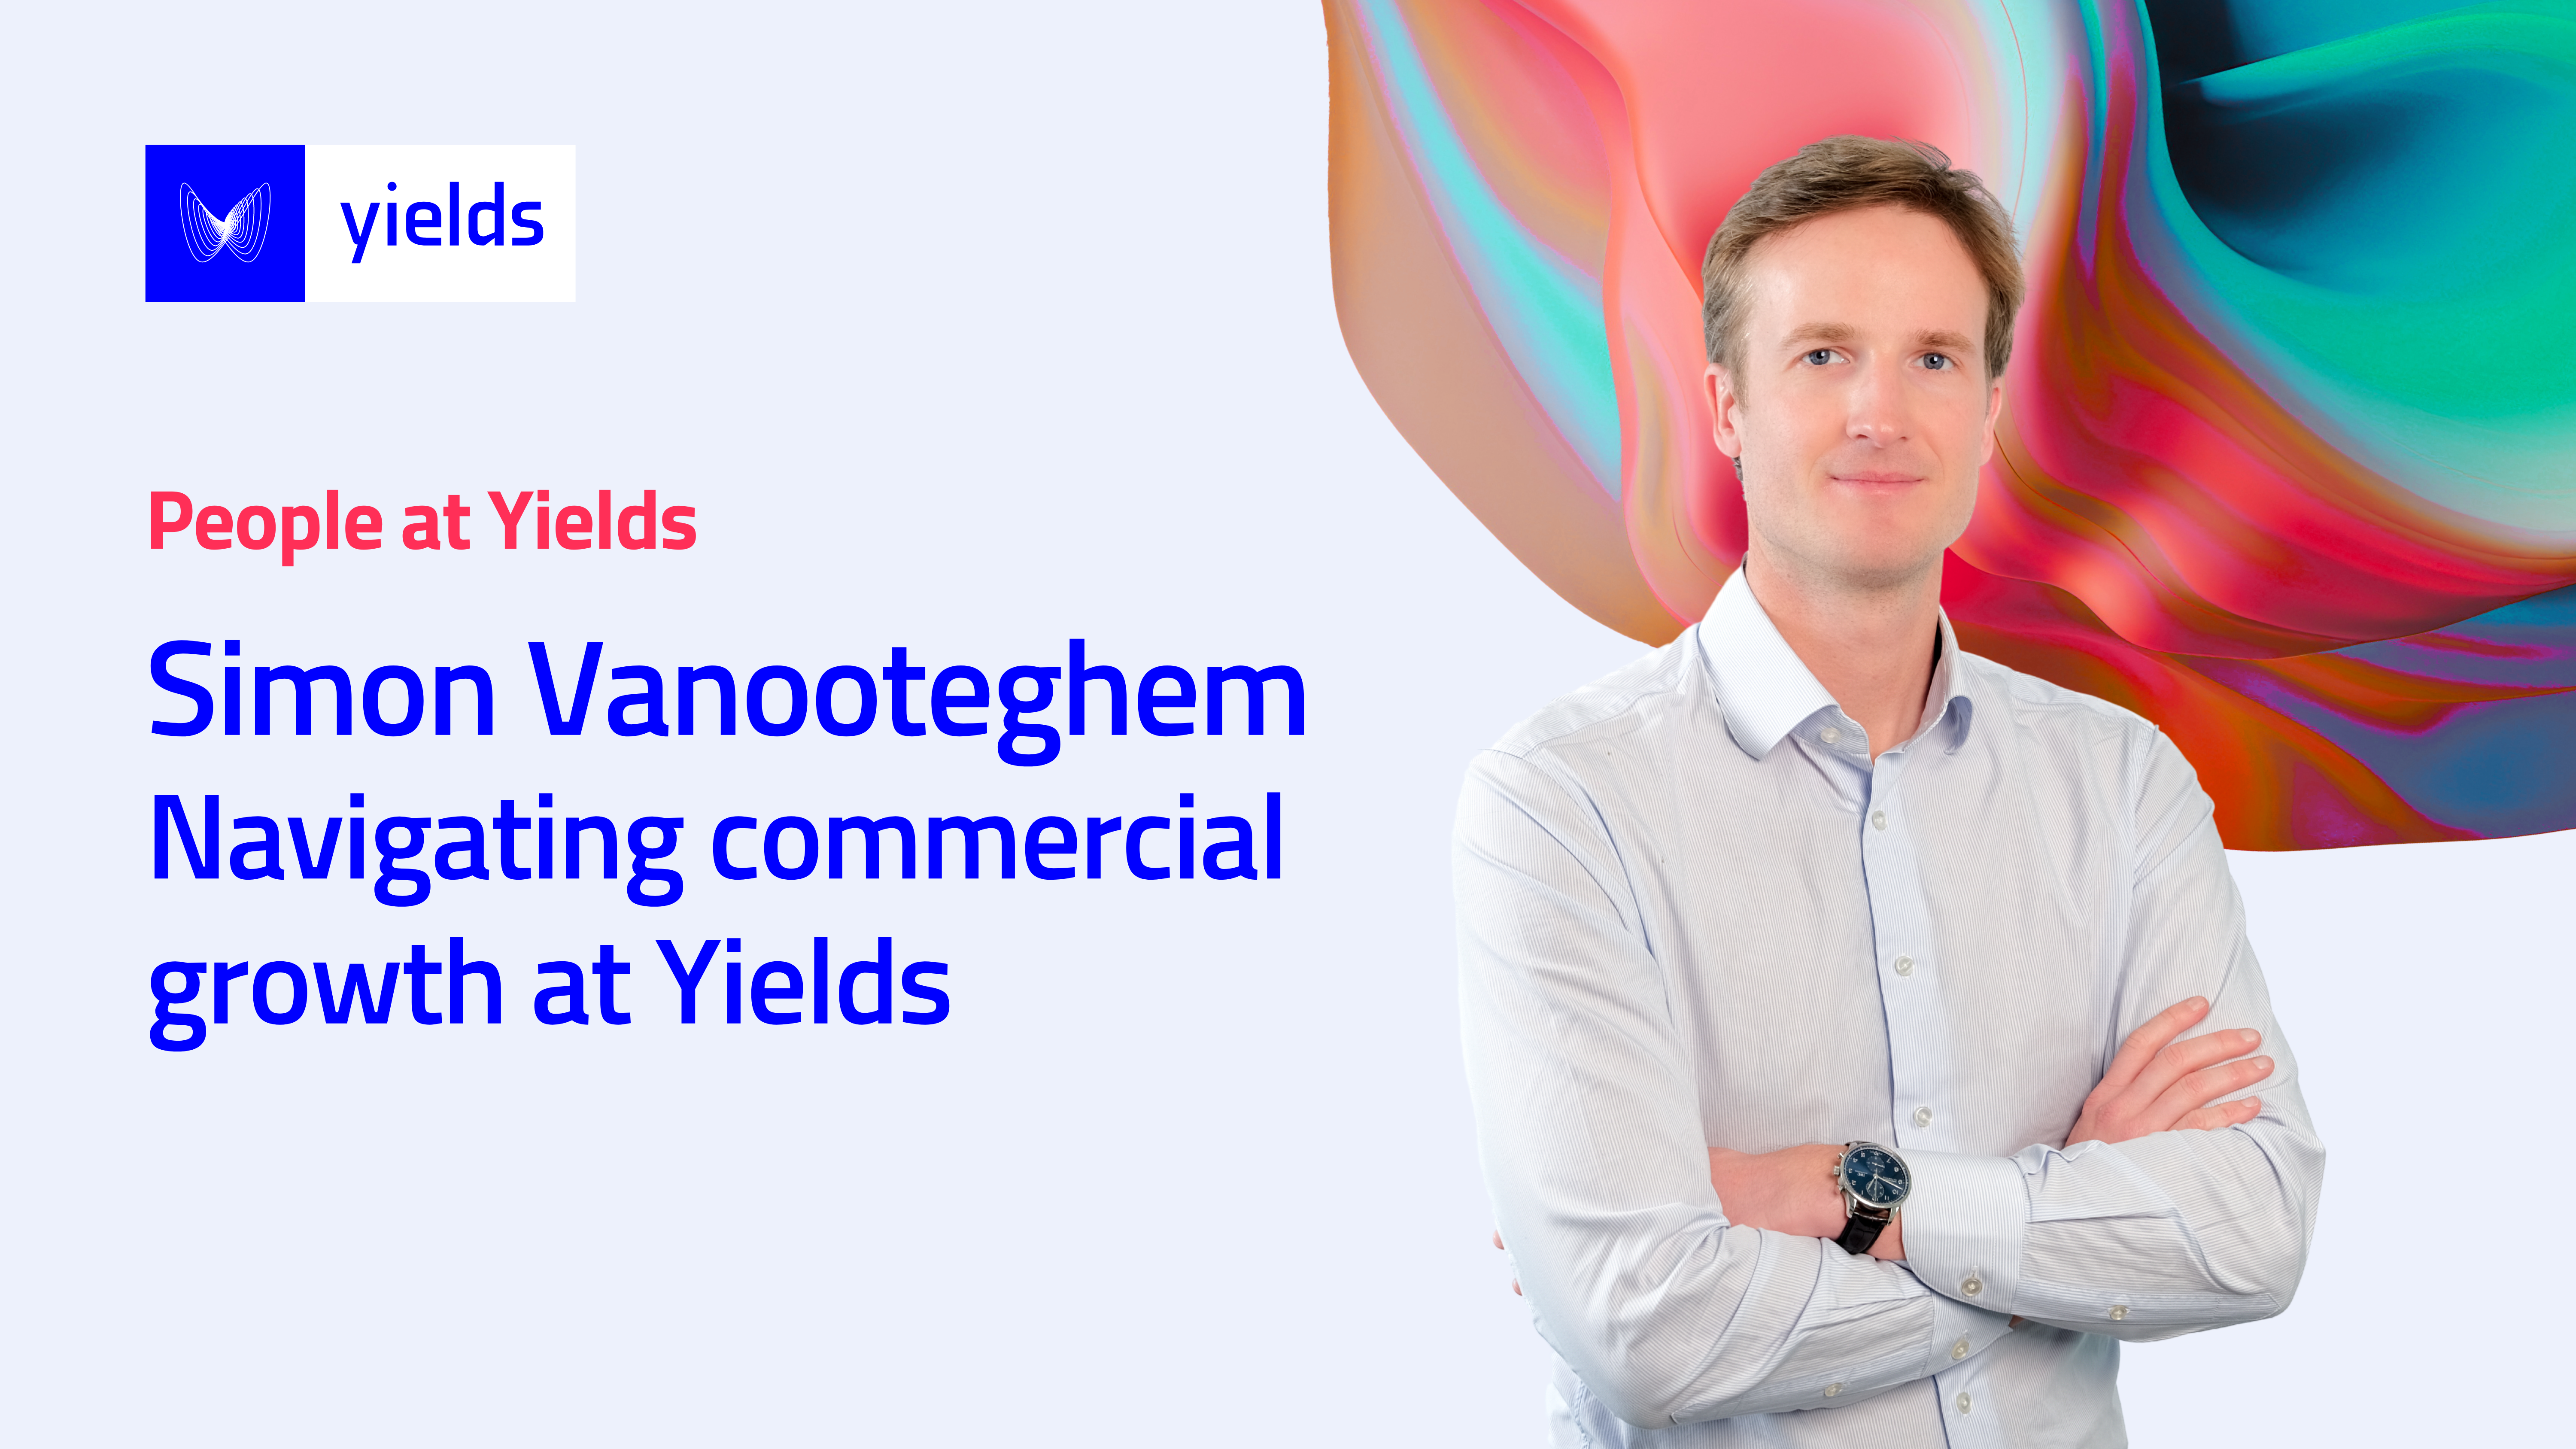 Simon Vanooteghem: Navigating commercial growth at Yields